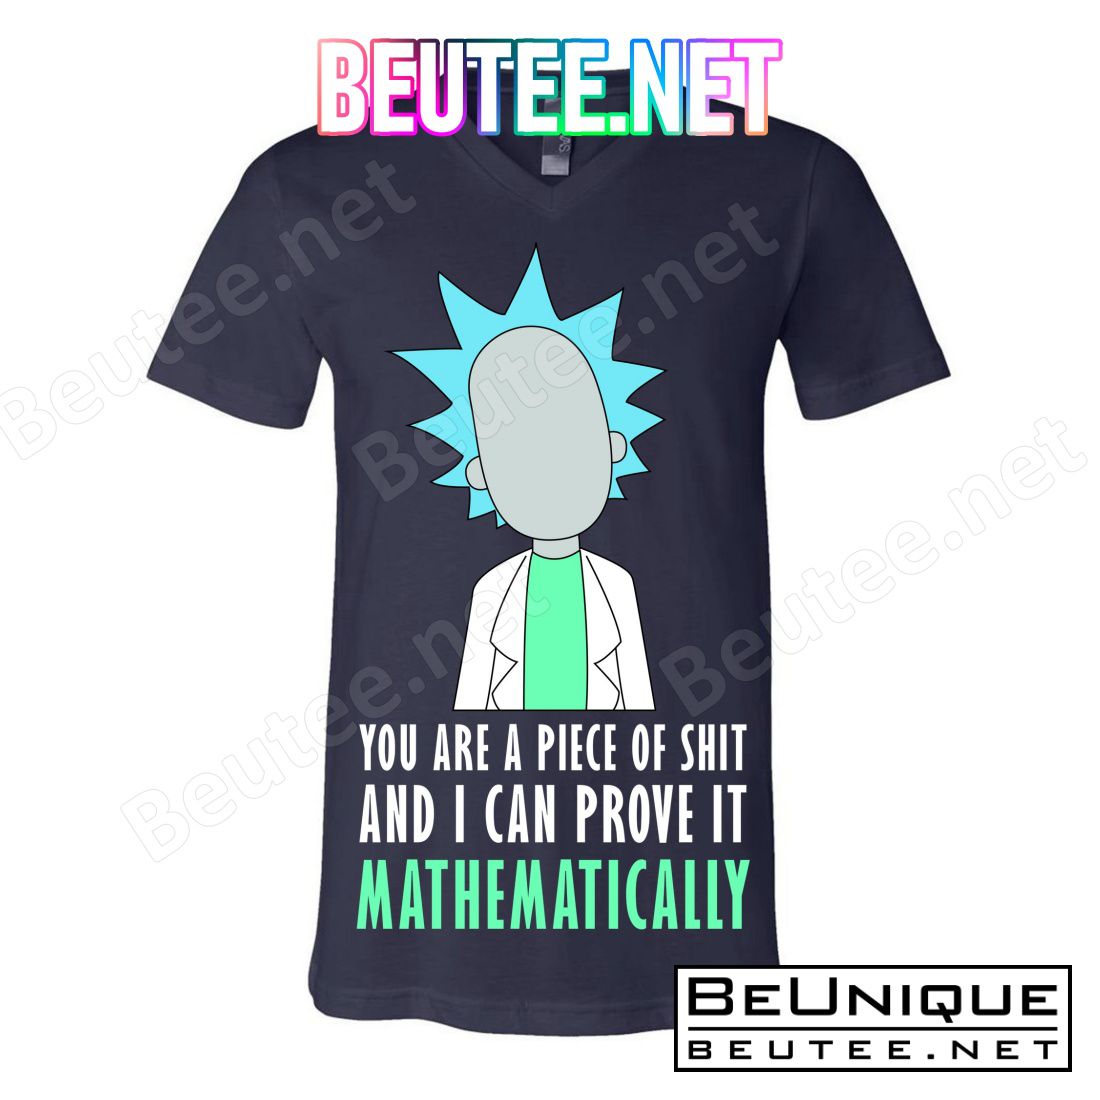 You Are A Piece Of Shit And I Can Prove It Mathematically T-Shirts